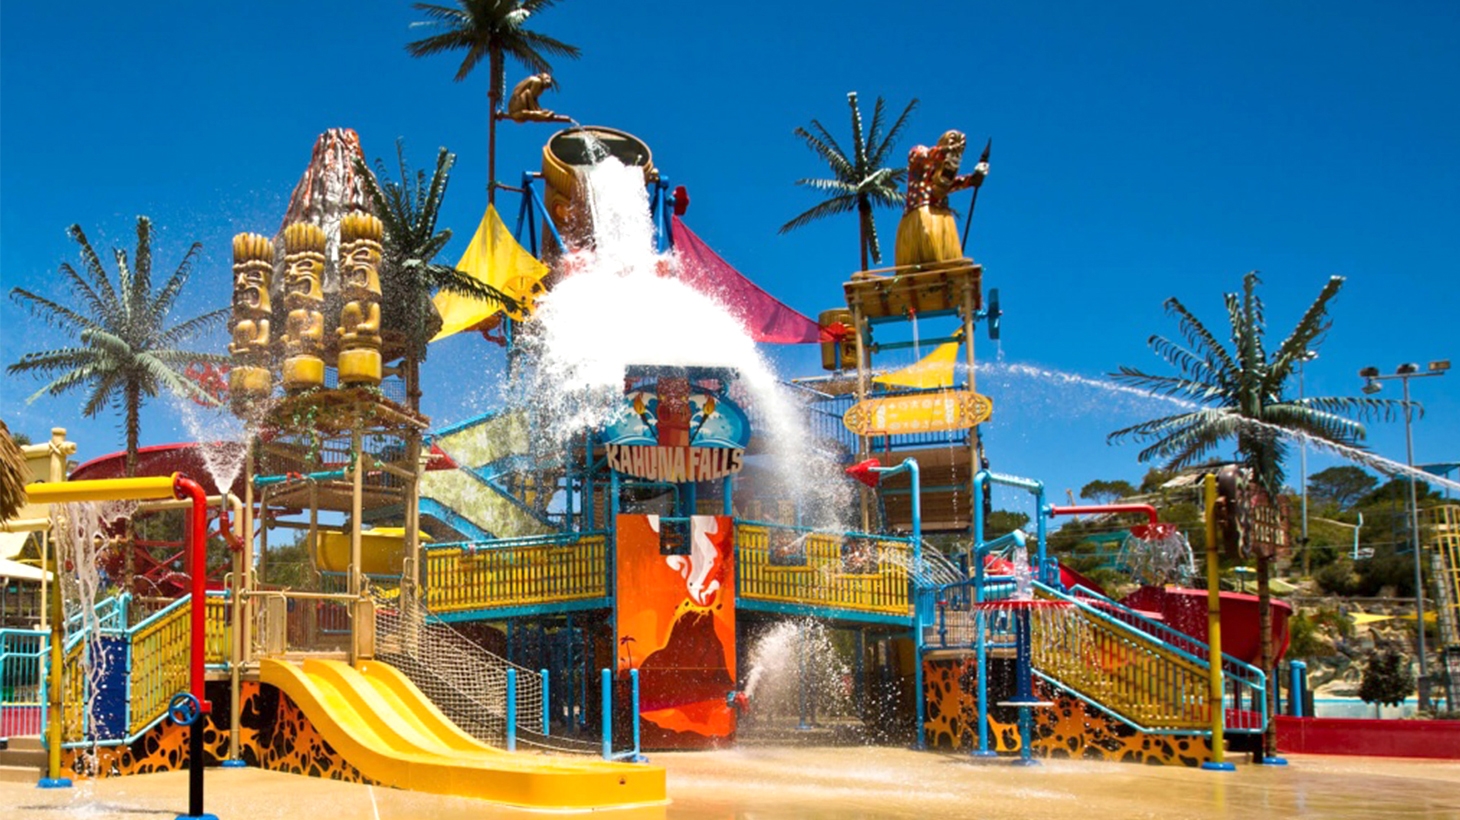 Just $45 for an Adventure World All-Day Ticket, Home of the Kraken and